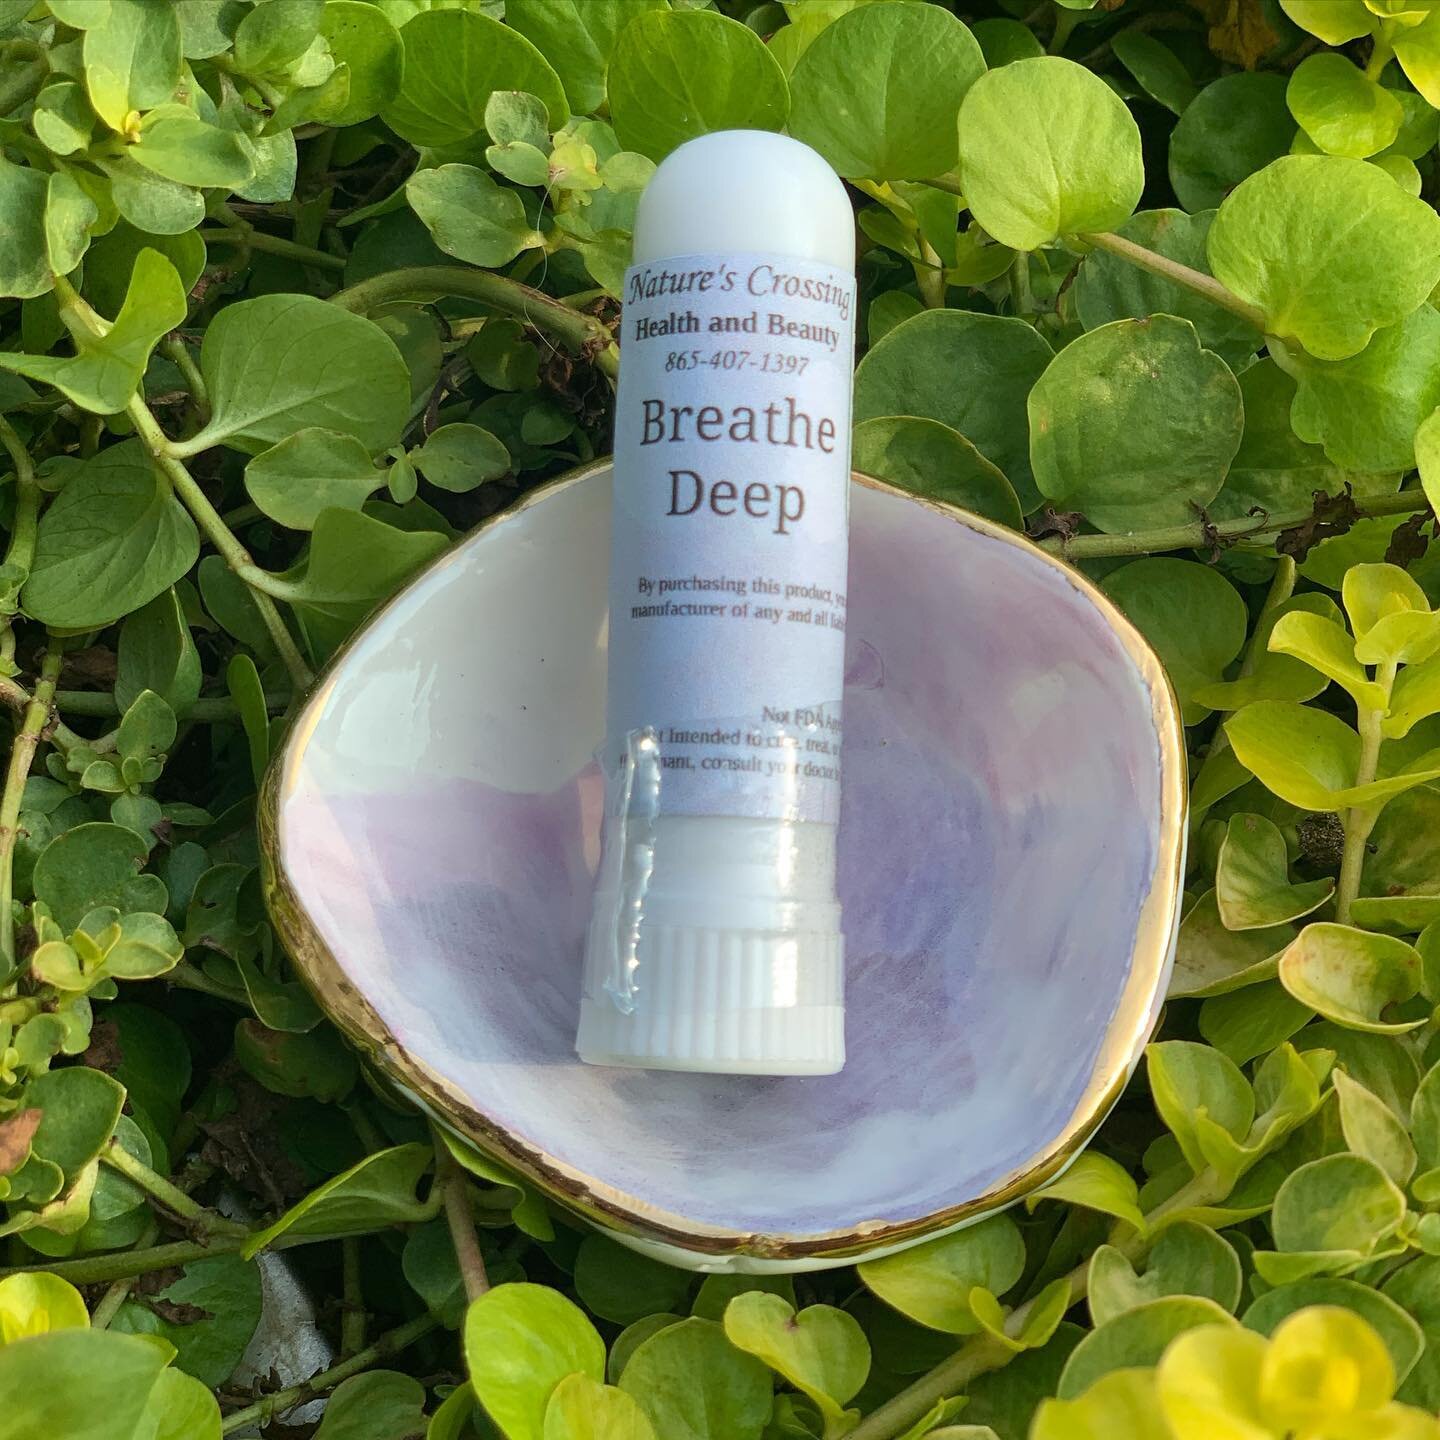 I don&rsquo;t know anyone who enjoys wearing a mask but these Breathe Deep plugs from @natures_crossing make it a much more pleasant experience.
.
Instead of smelling my own breath all day, I smell lovely essential oils thanks to this plug. It&rsquo;